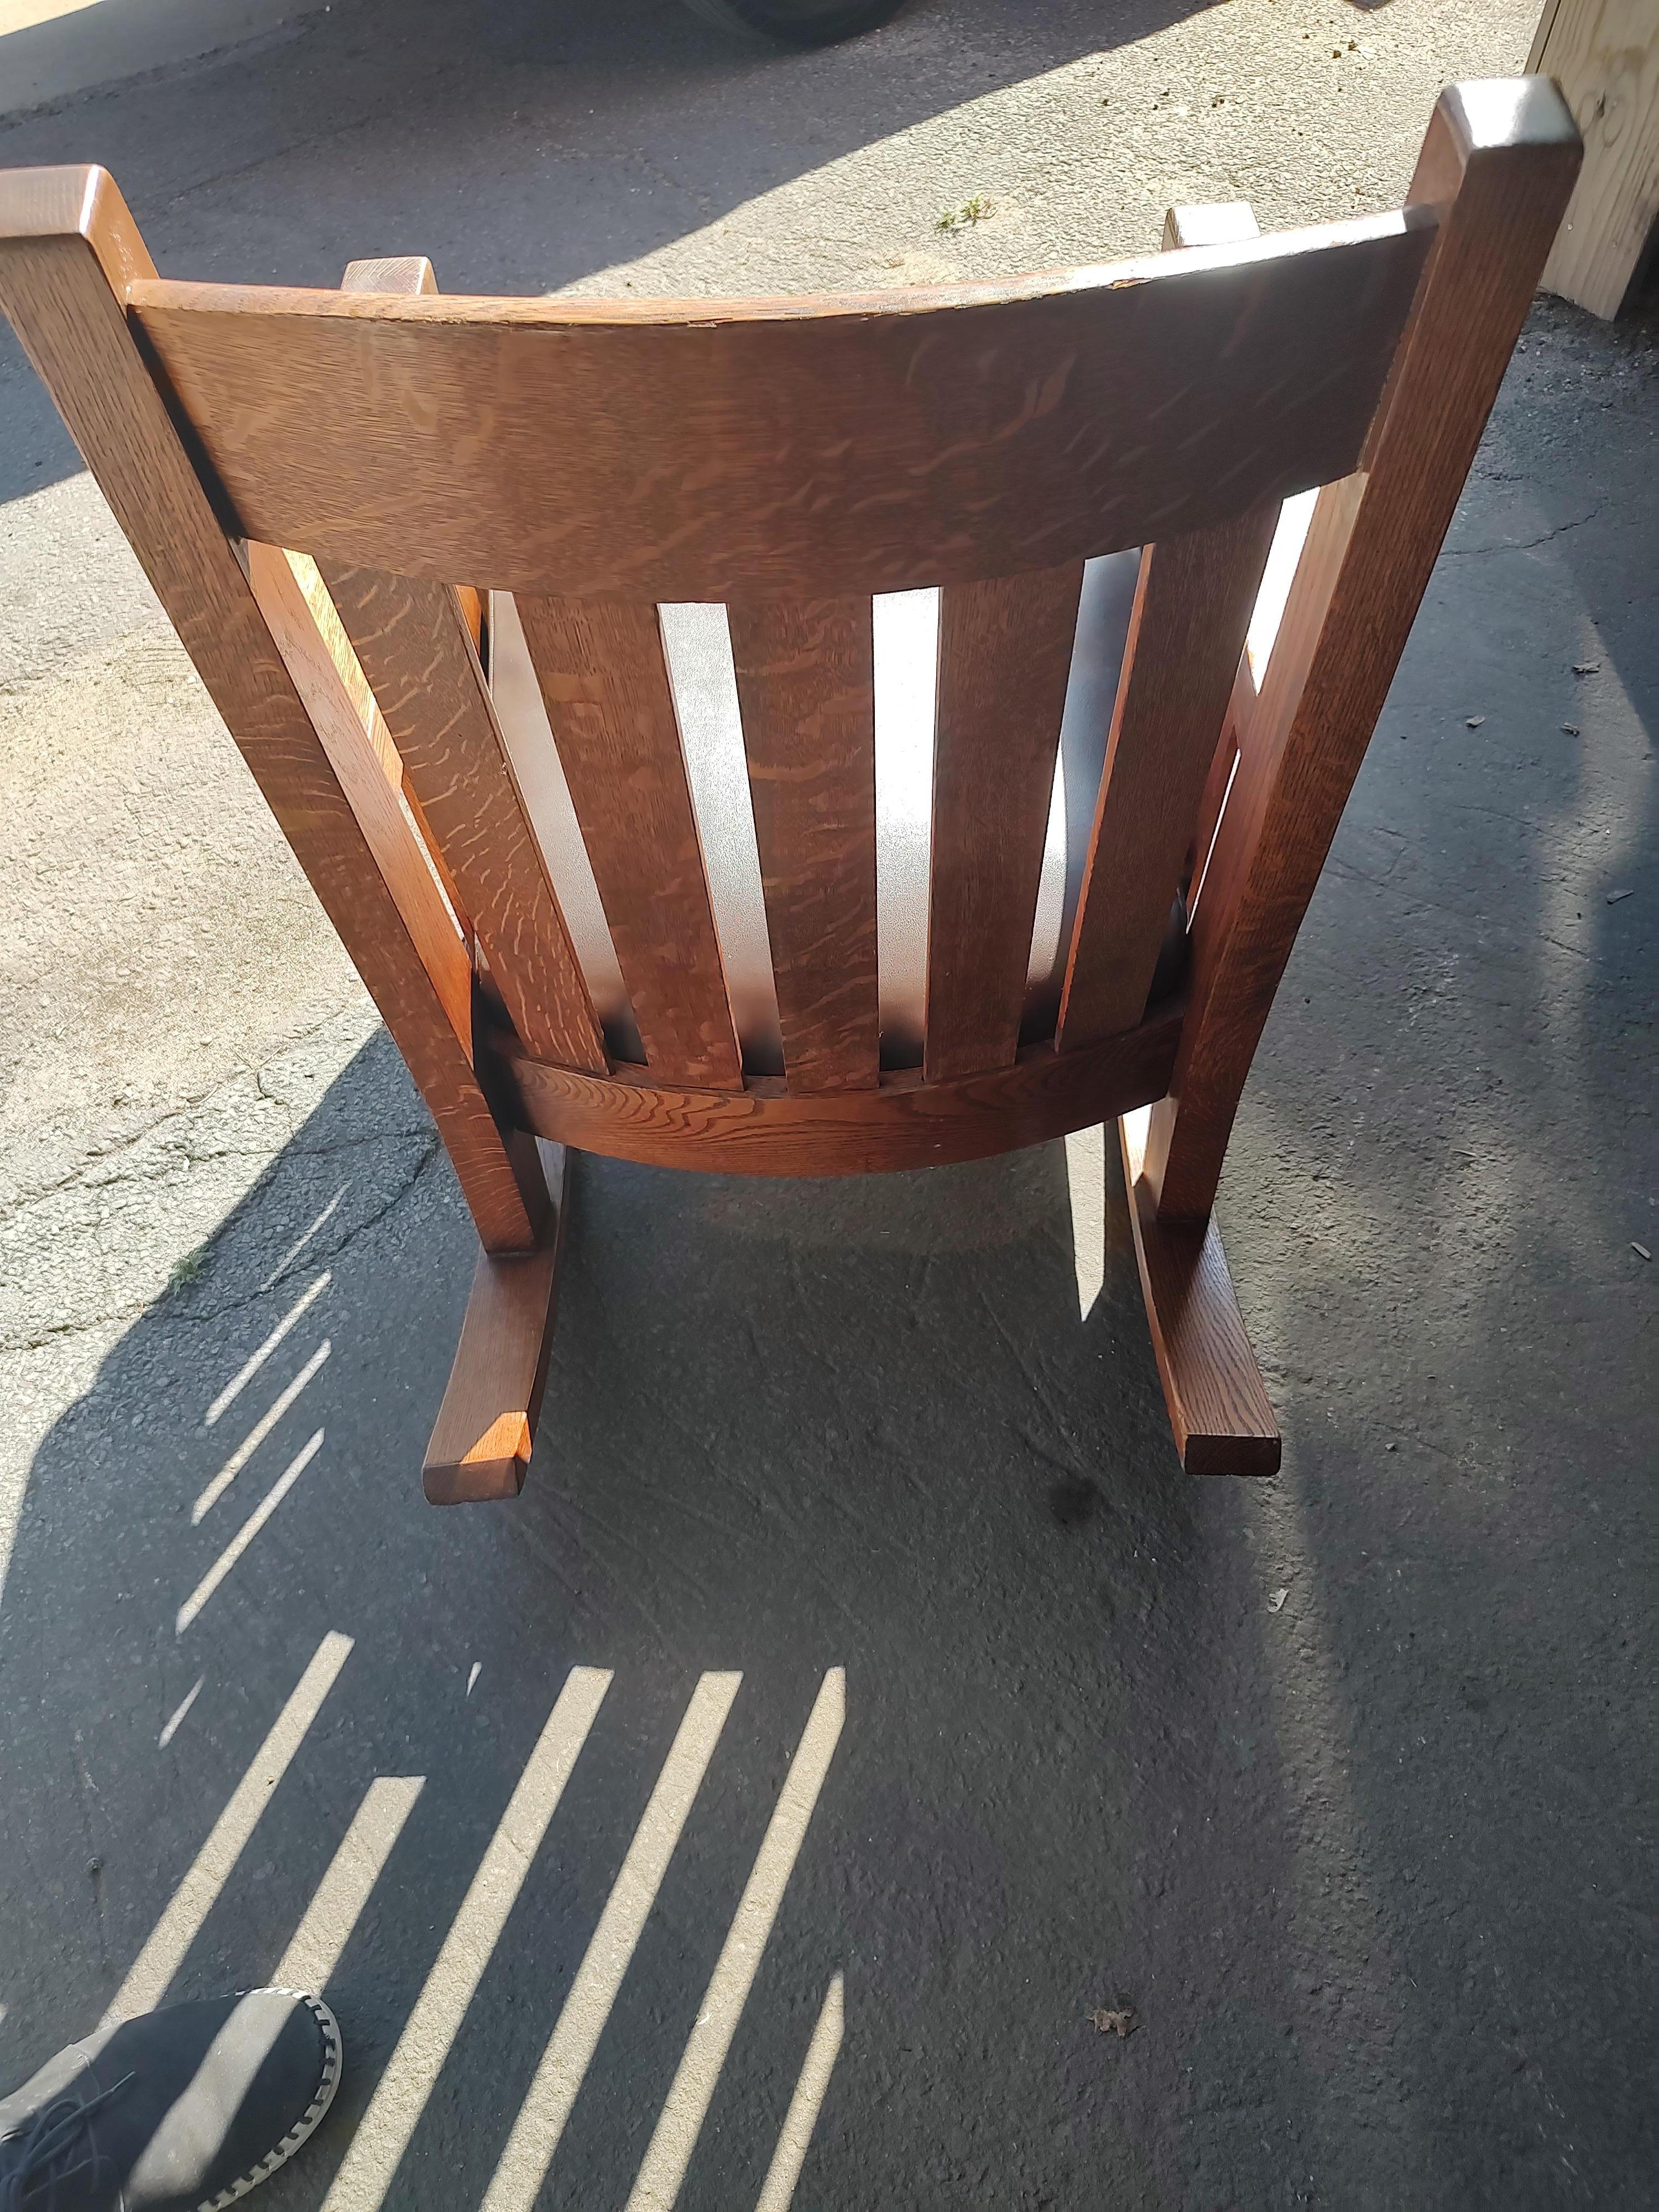 Early 20th Century Arts & Crafts Mission Quarter Sawn Oak Rocking Chair by Harden, circa 1905